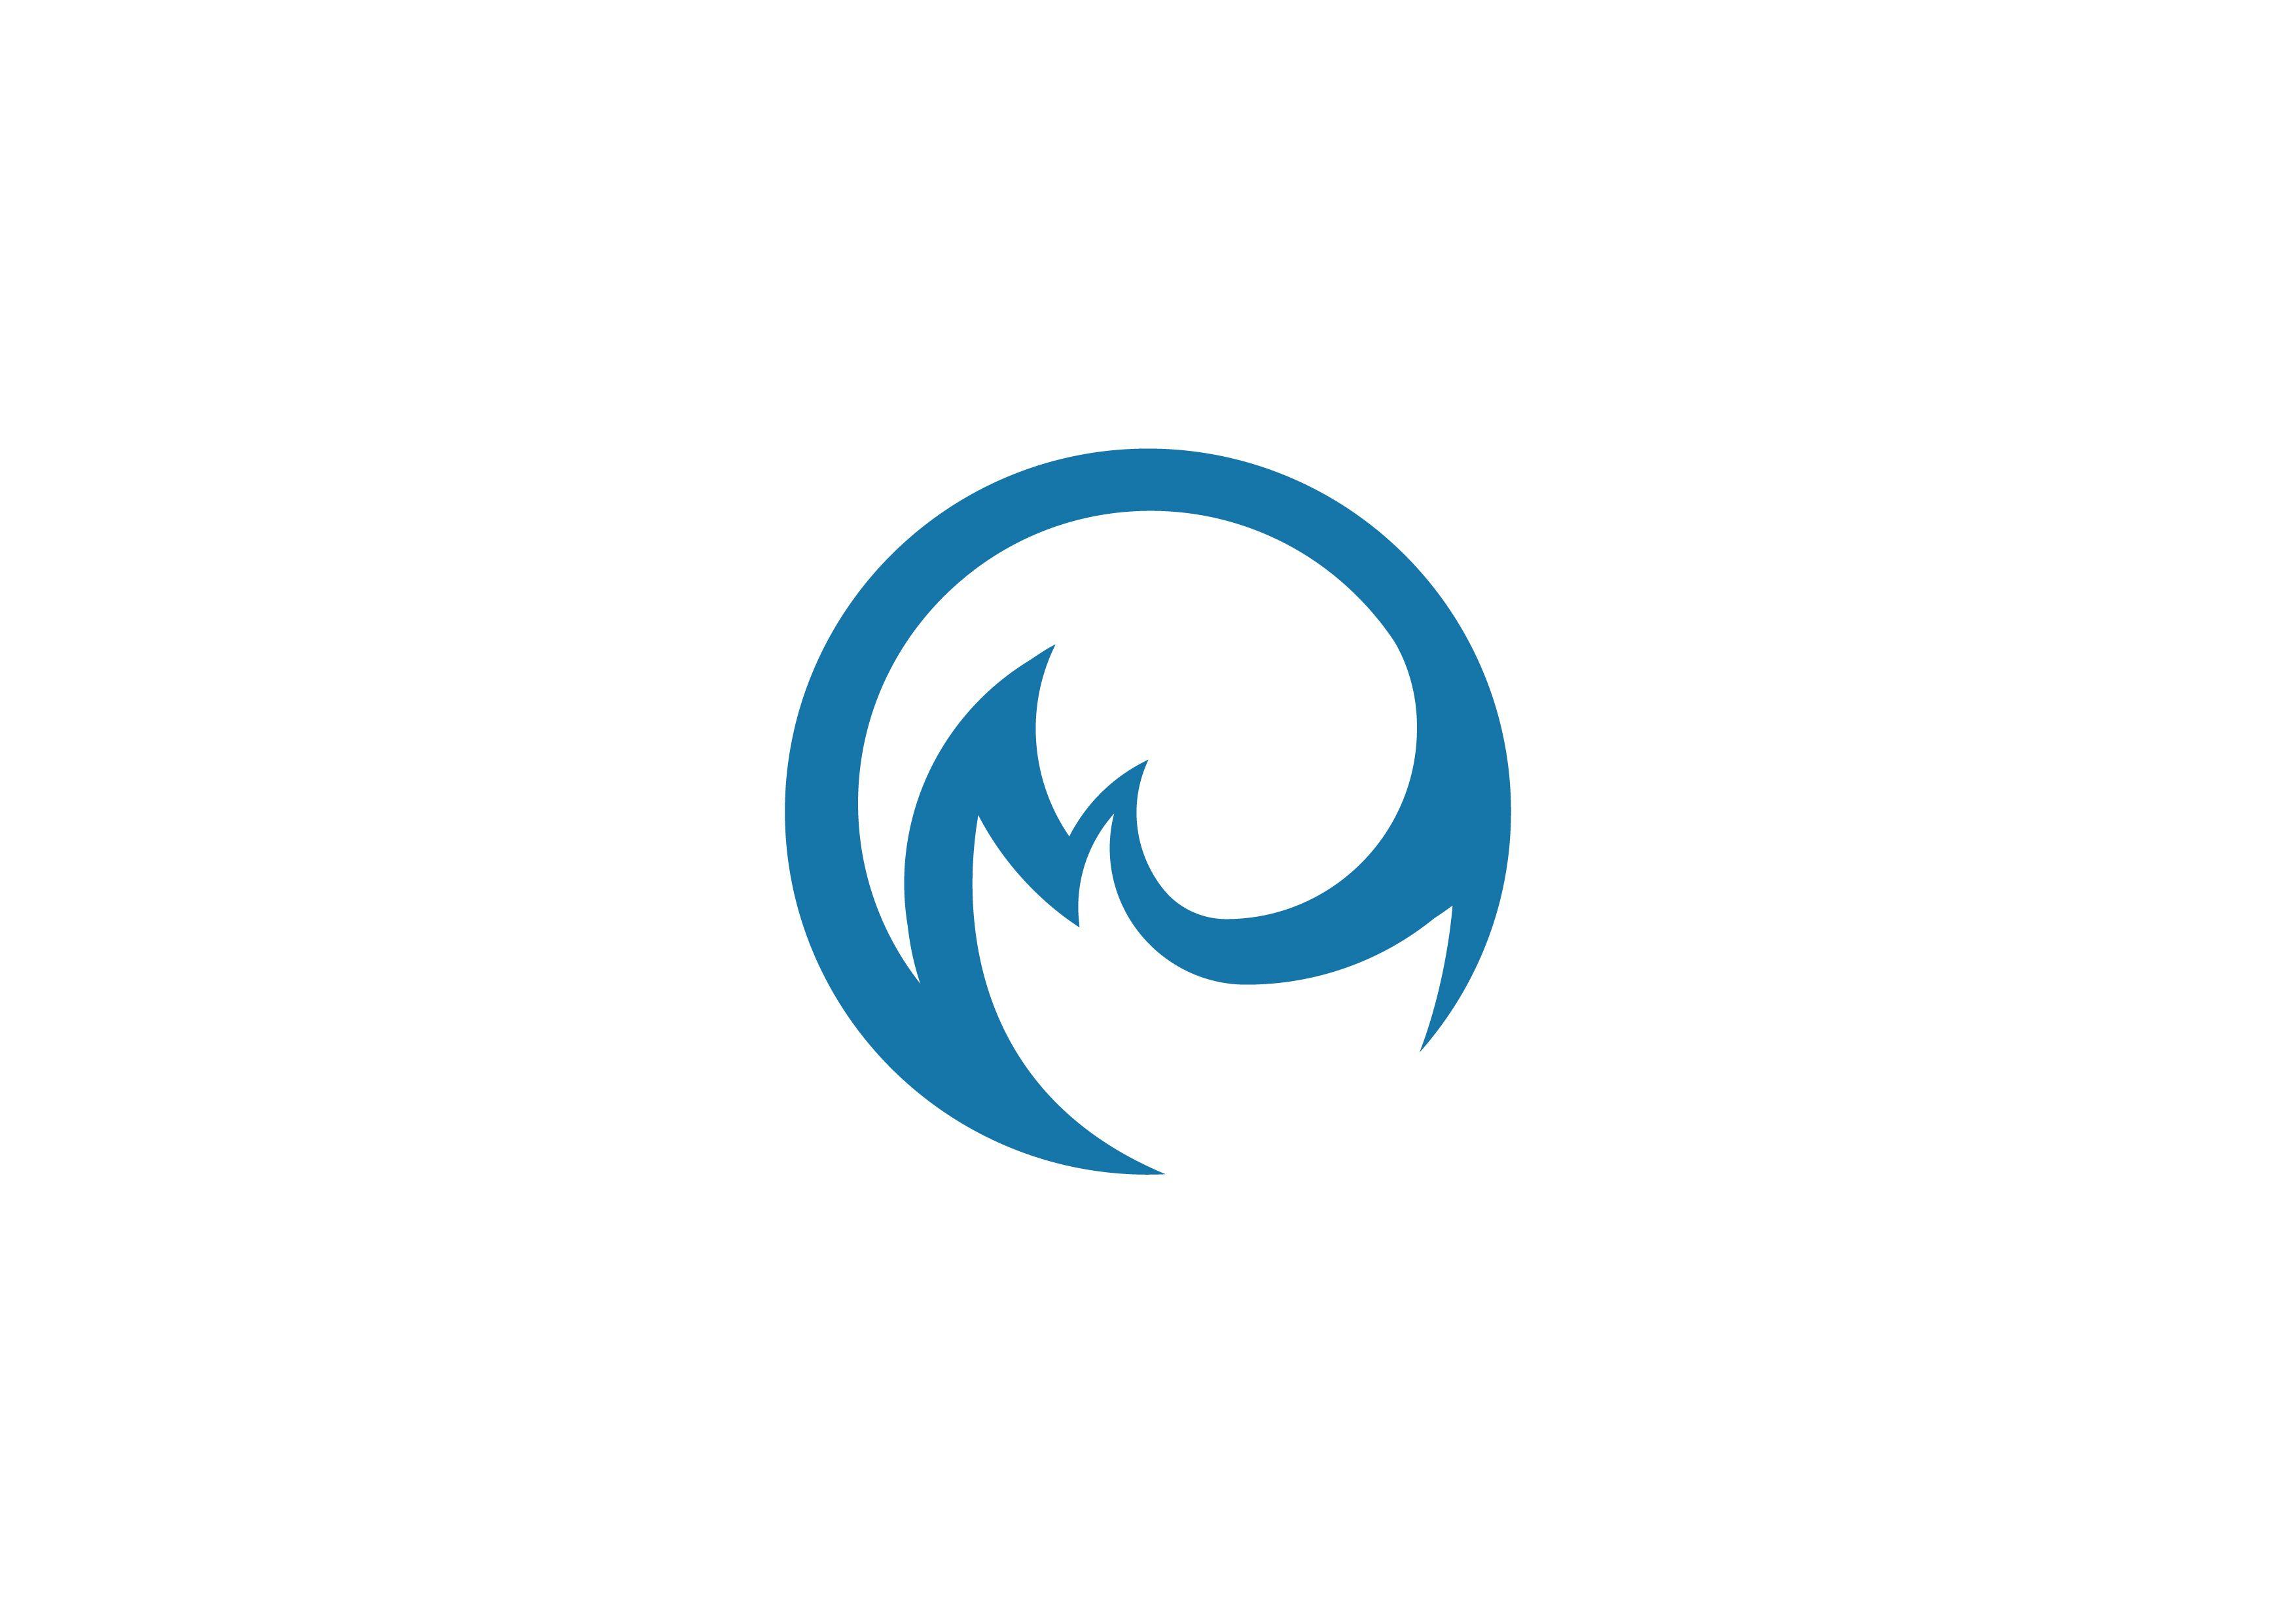 White and Blue D-Logo Logo - Logo. Marine and Freshwater Research Institute